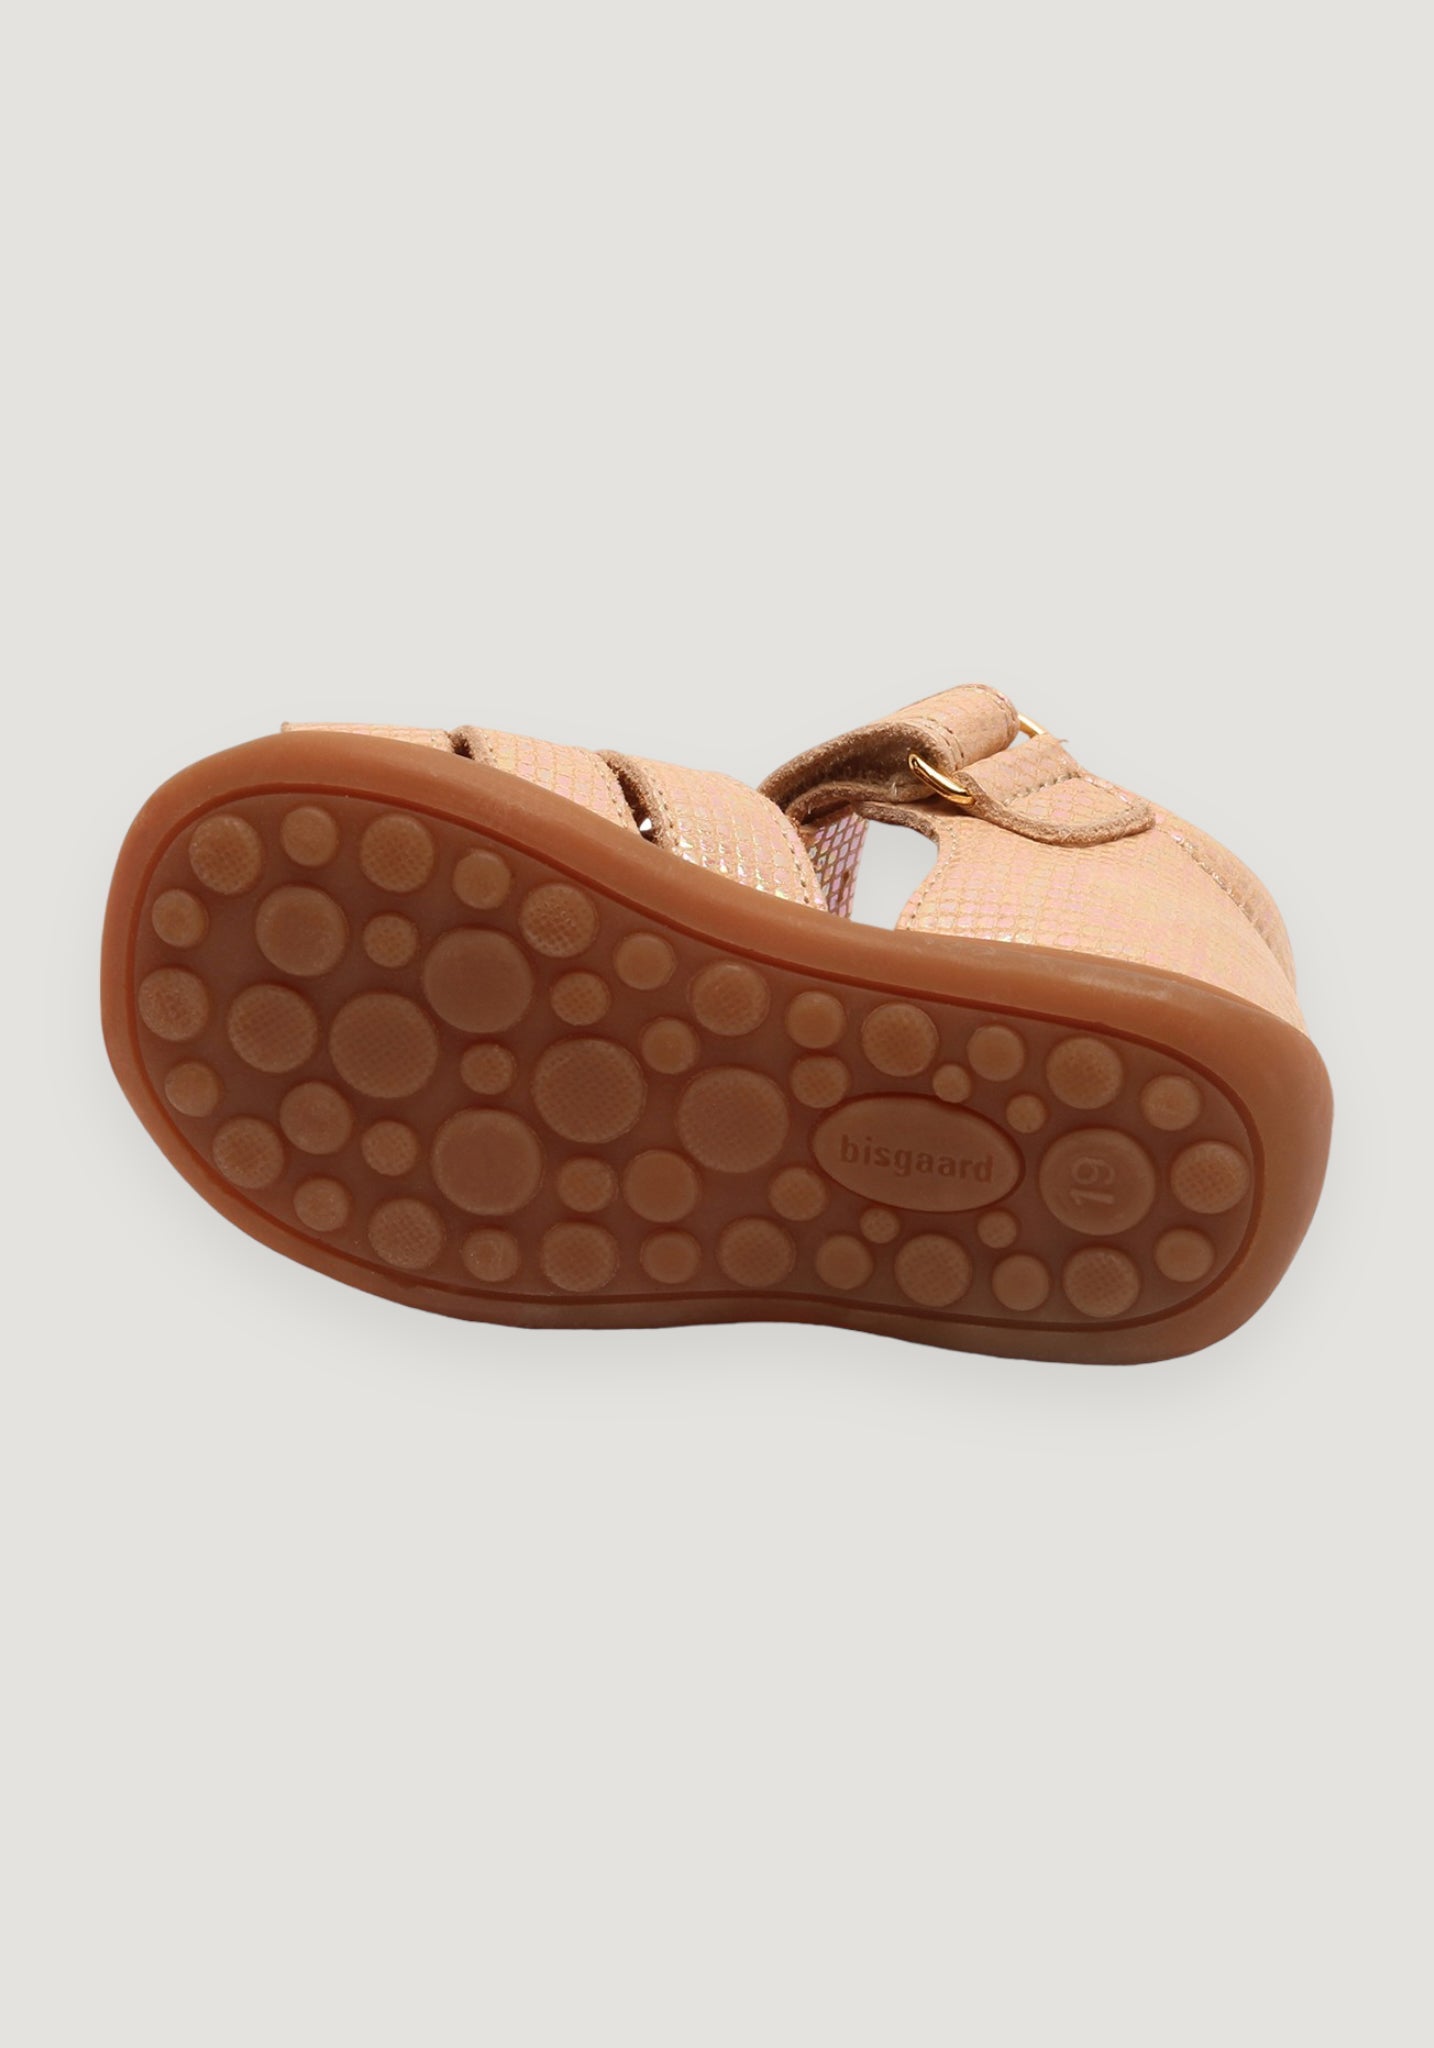 Sandale First Step piele - Carly Creme Bisgaard HipHip.ro